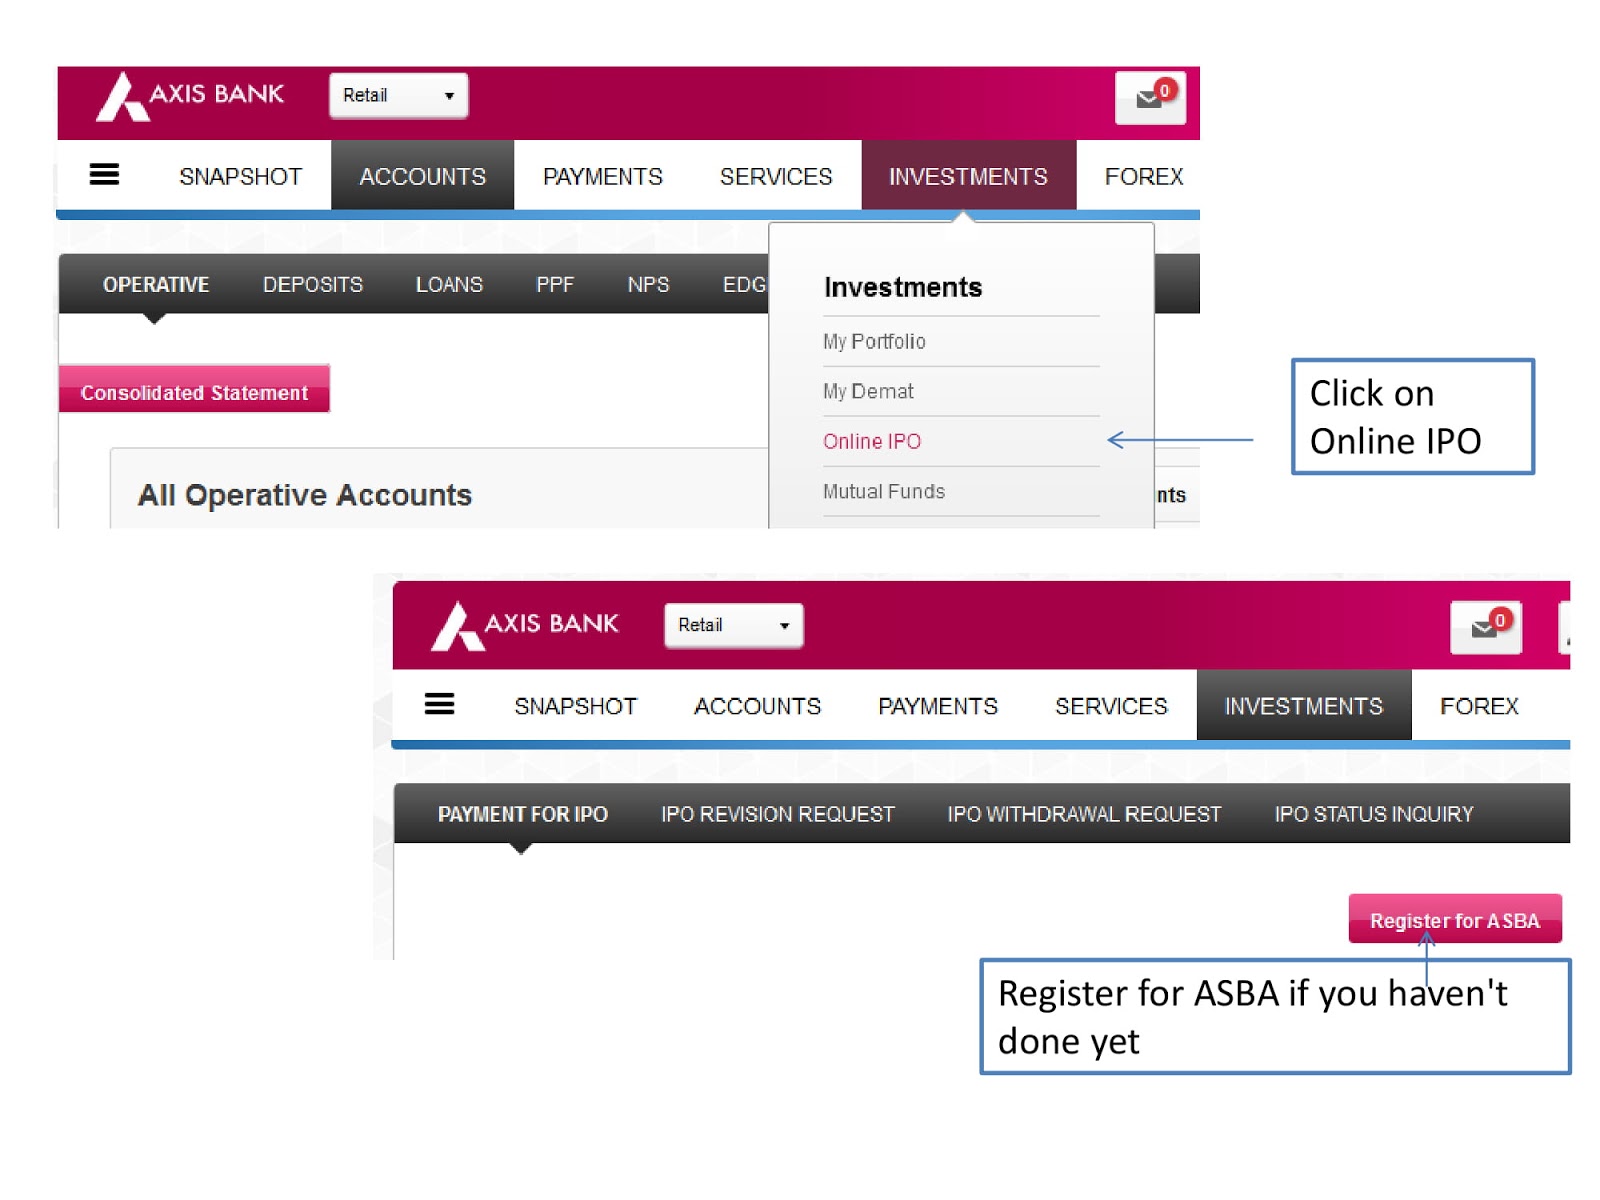 How To Apply Ipo Online With Asba Through Axis Bank Netbanking - 